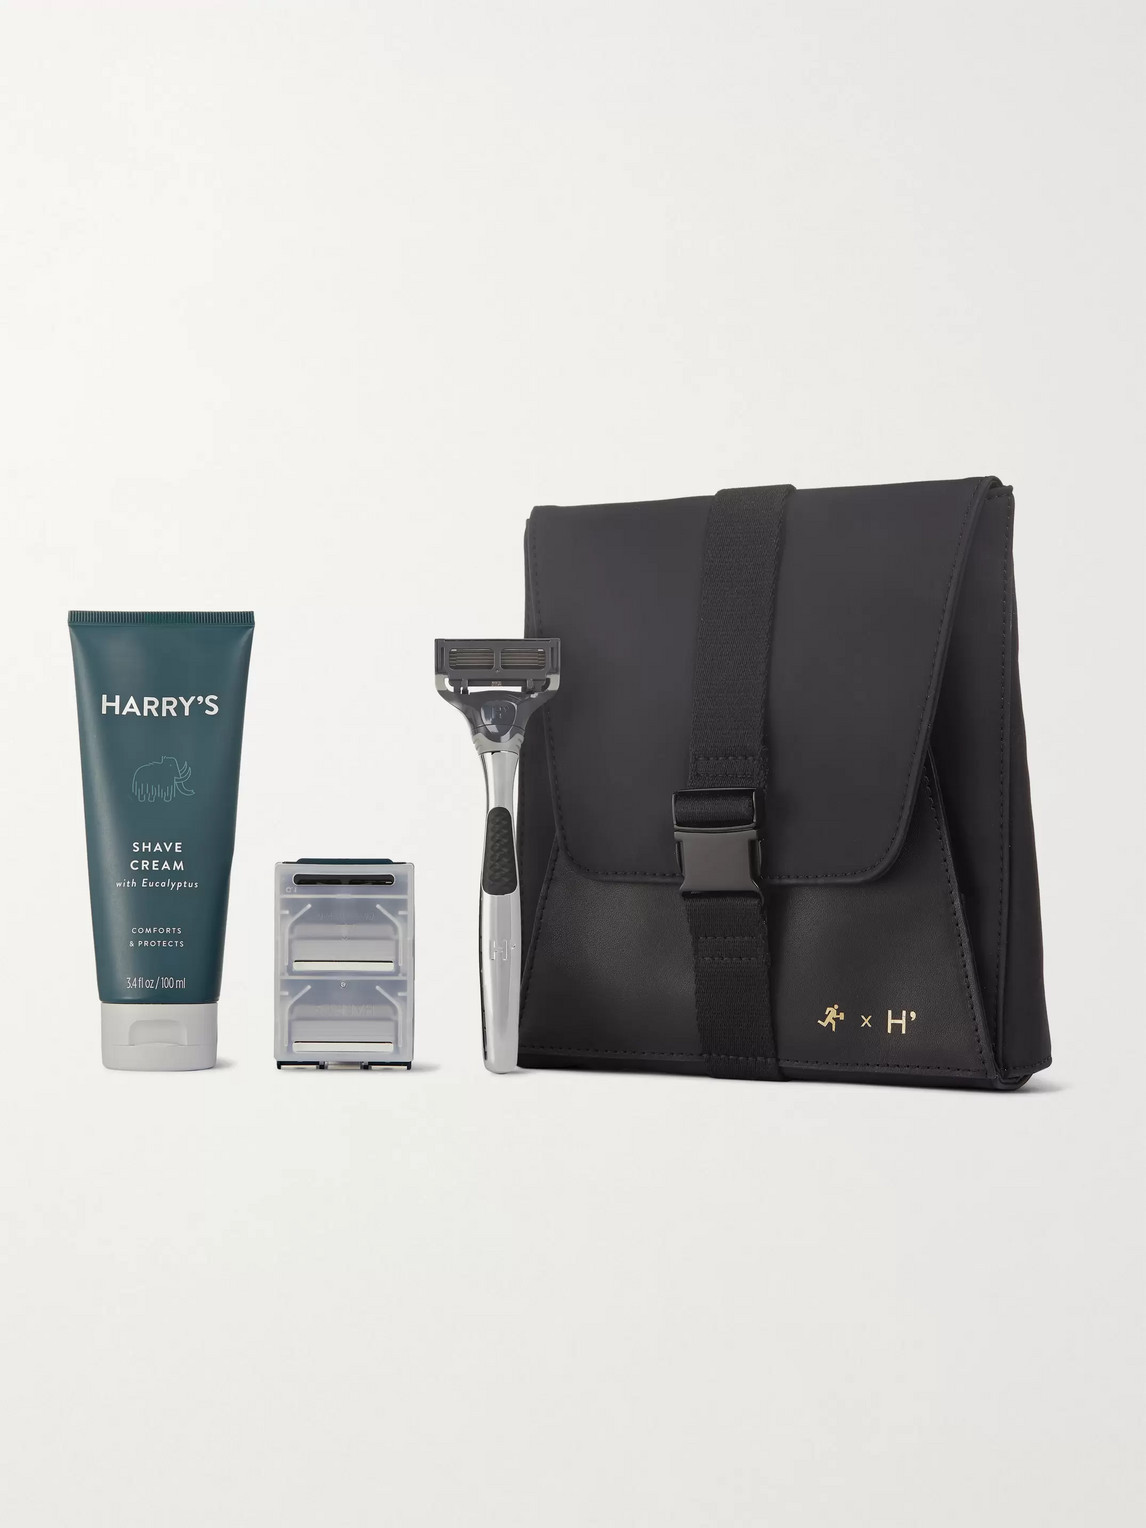 Harry's Want Les Essentiels Travel Shaving Set In Colourless